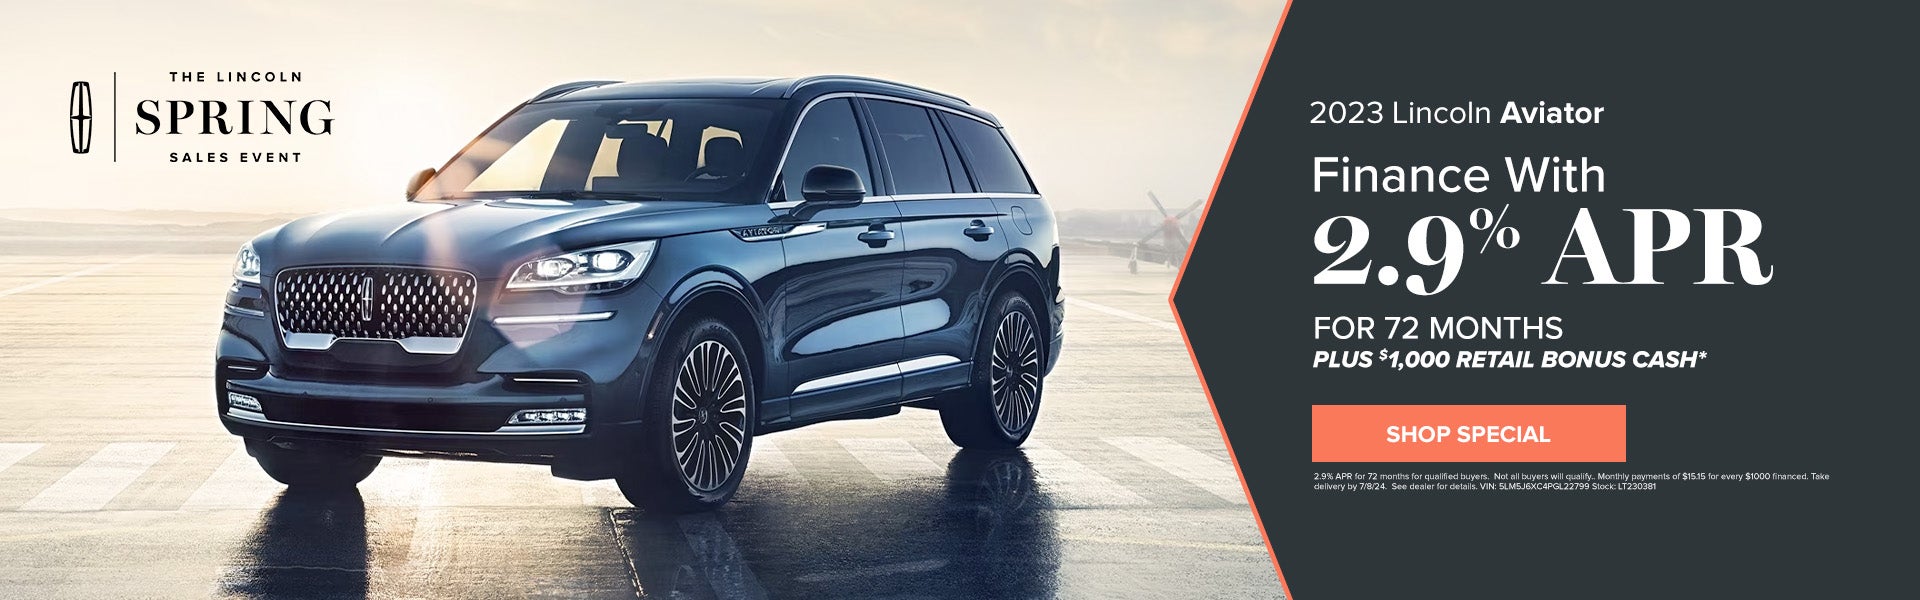 Finance a 2023 Lincoln Aviator with 2.9% APR for 72 months 